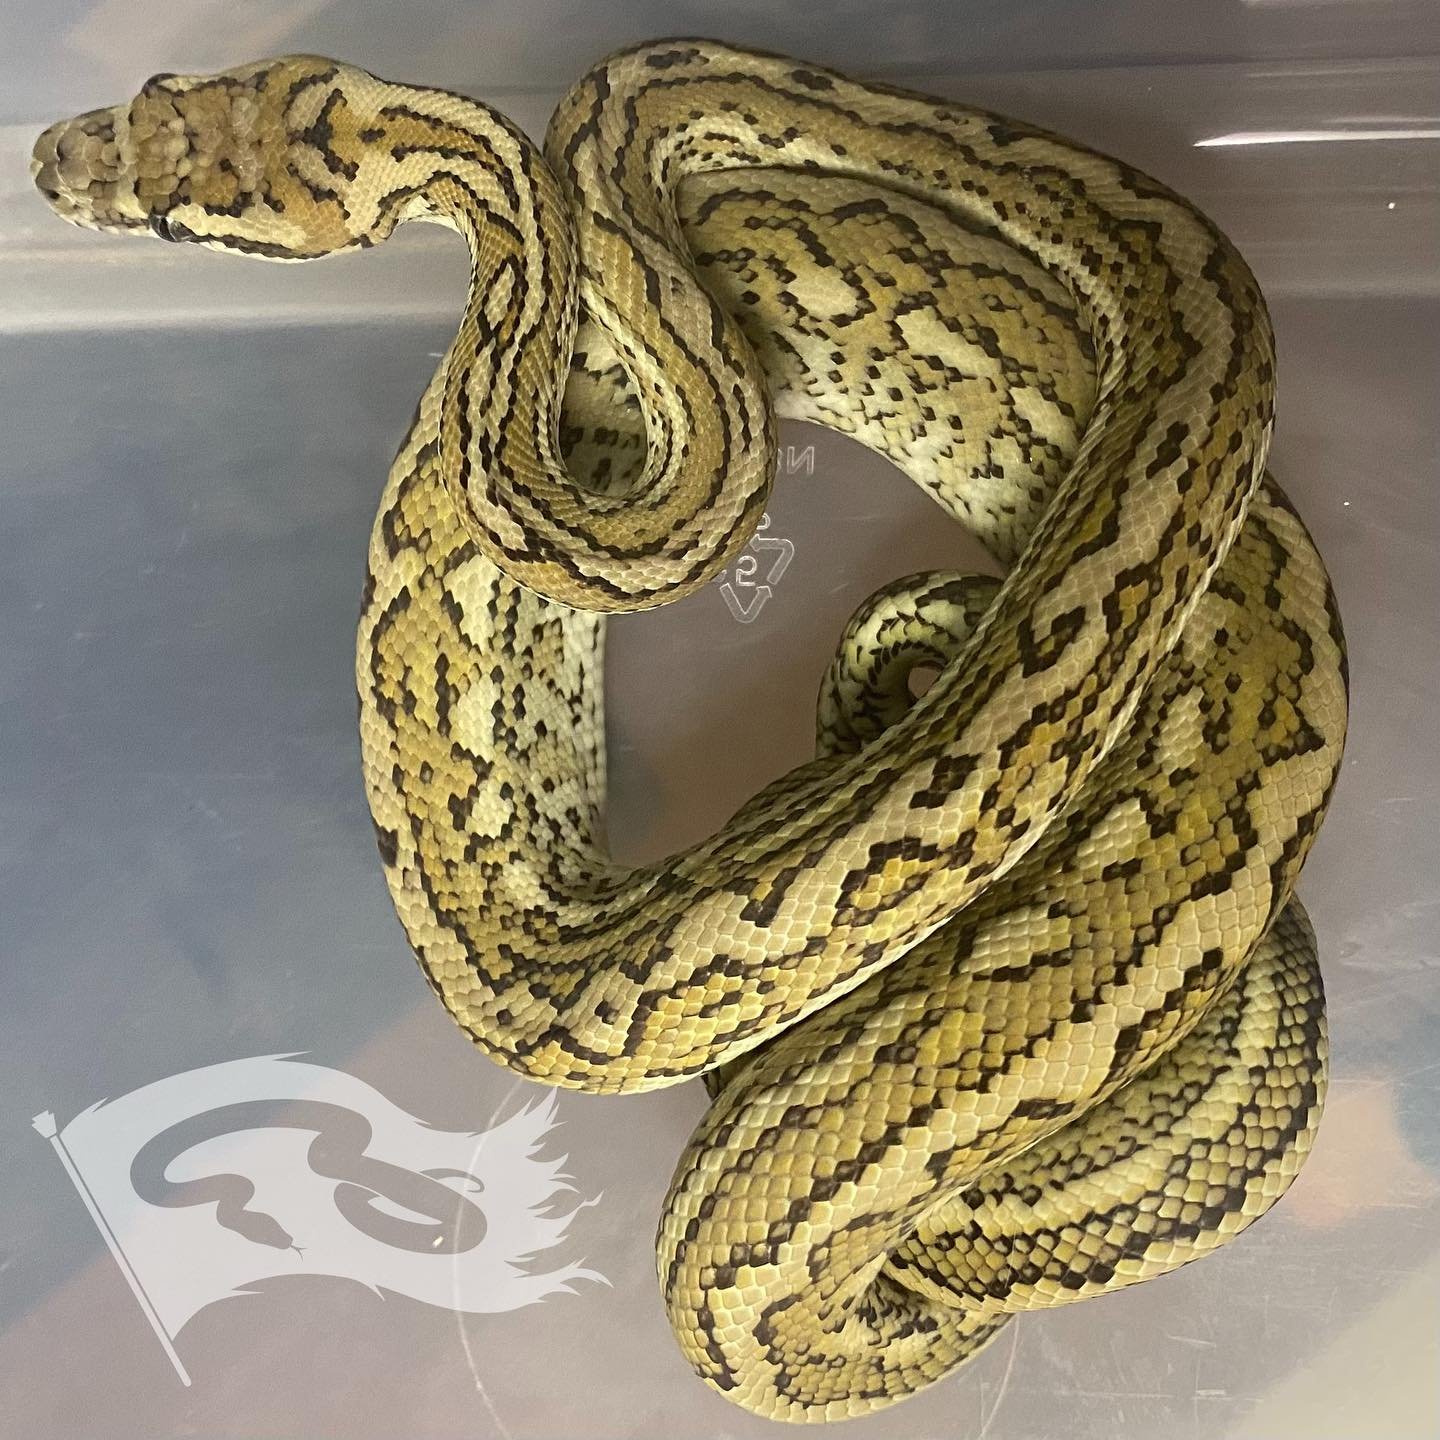 Female red coastal that is making me actually start a red project. Produced by @itsbudluv. 

#morelia #moreliapythonradionetwork #moreliapython #moreliapythonradio #moreliapythons #redcoastalcarpet #redcoastalcarpetpython #carpetpythonmorph #carpetpy